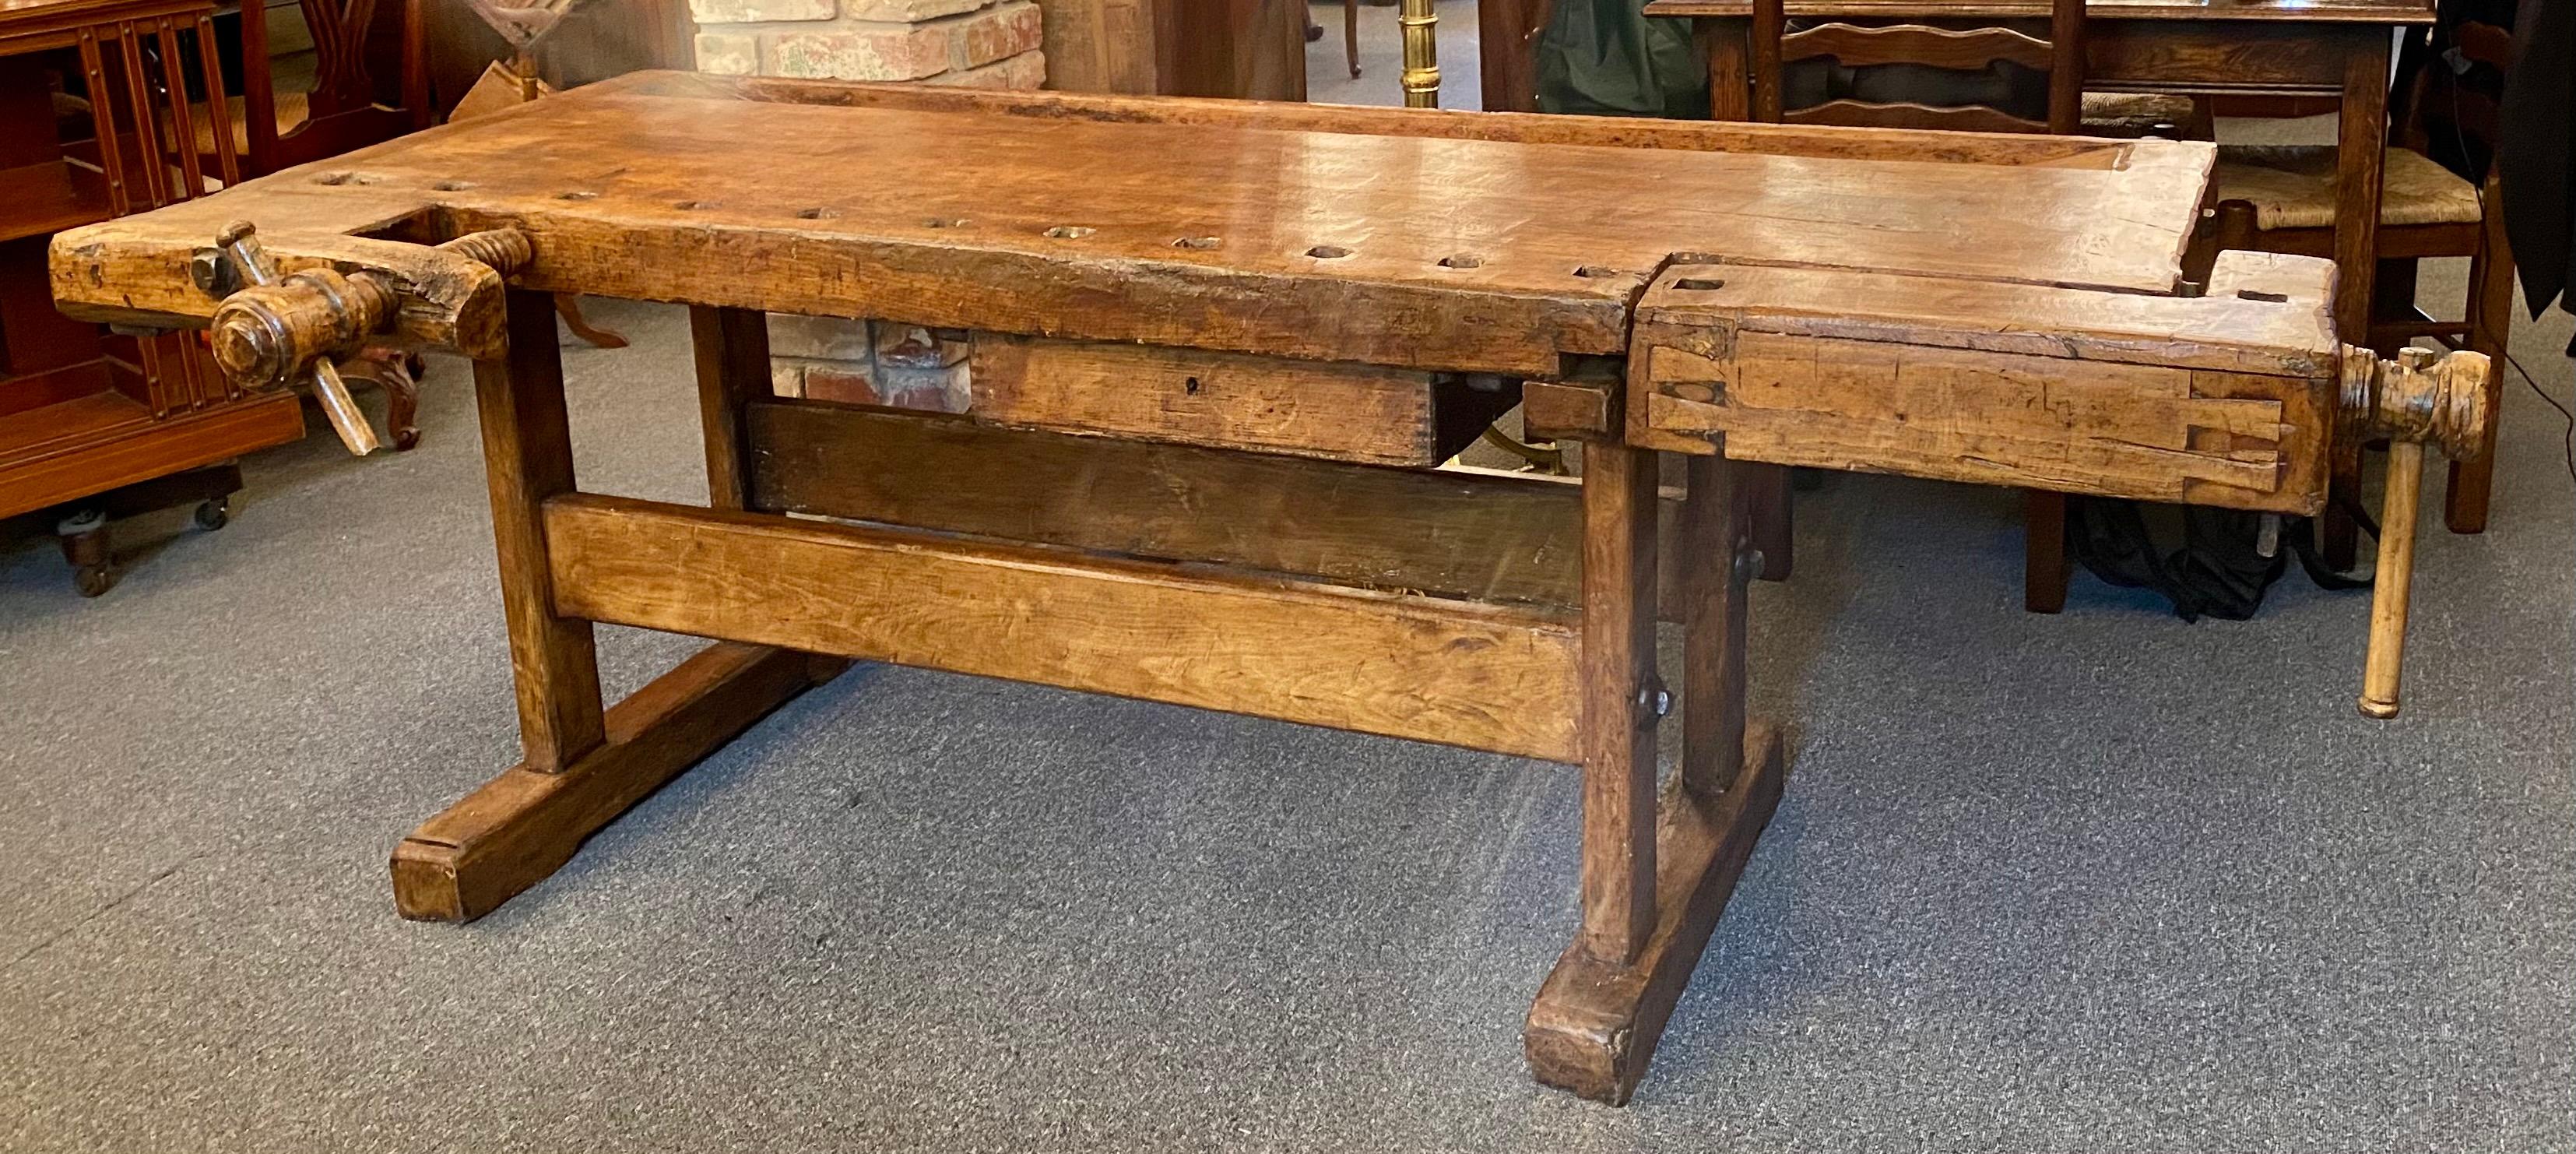 antique workbench with drawers